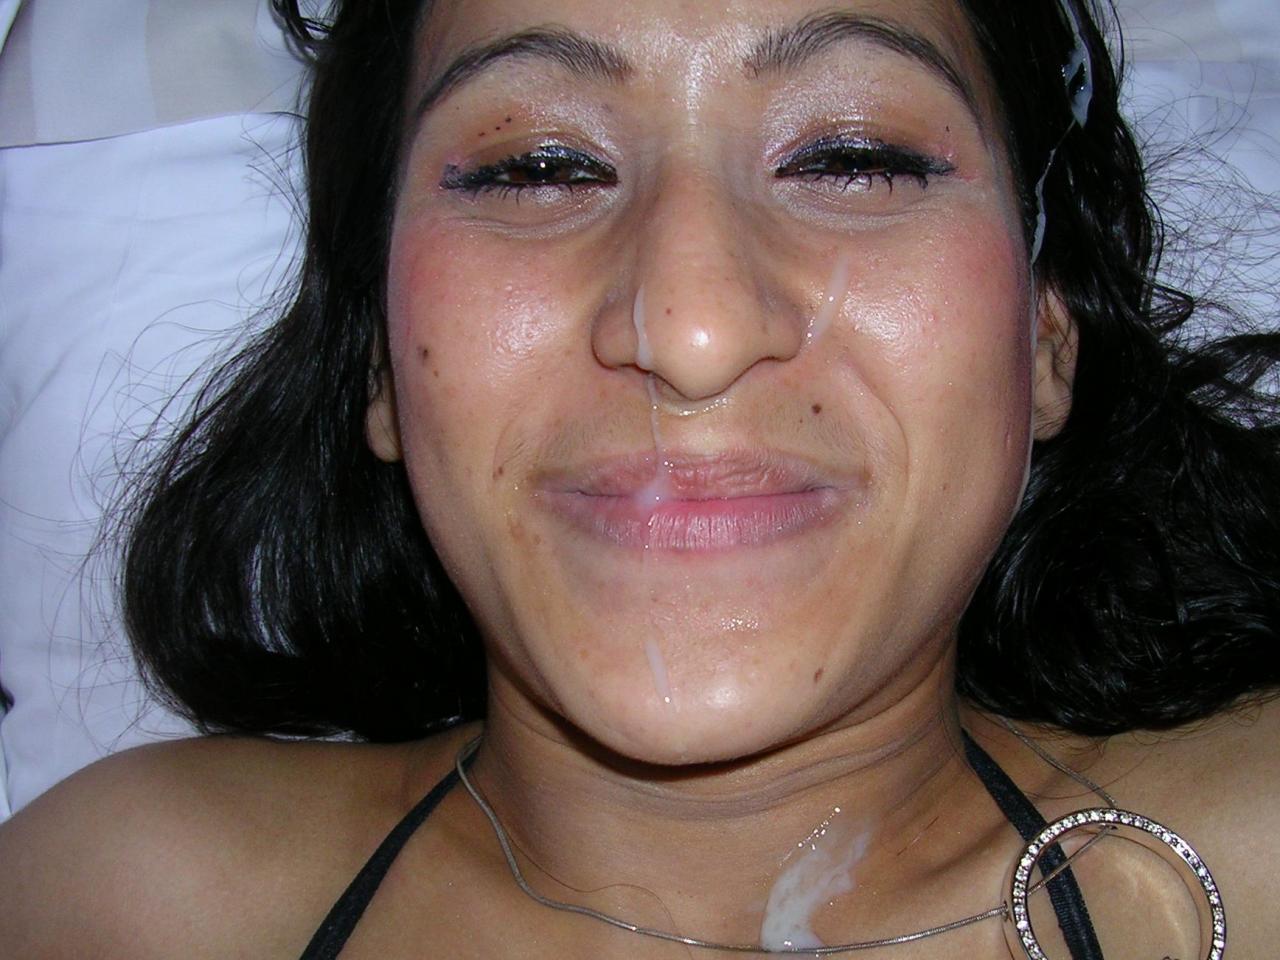 Mixed Set of Amateur Girlfriends with Pierced Tongue